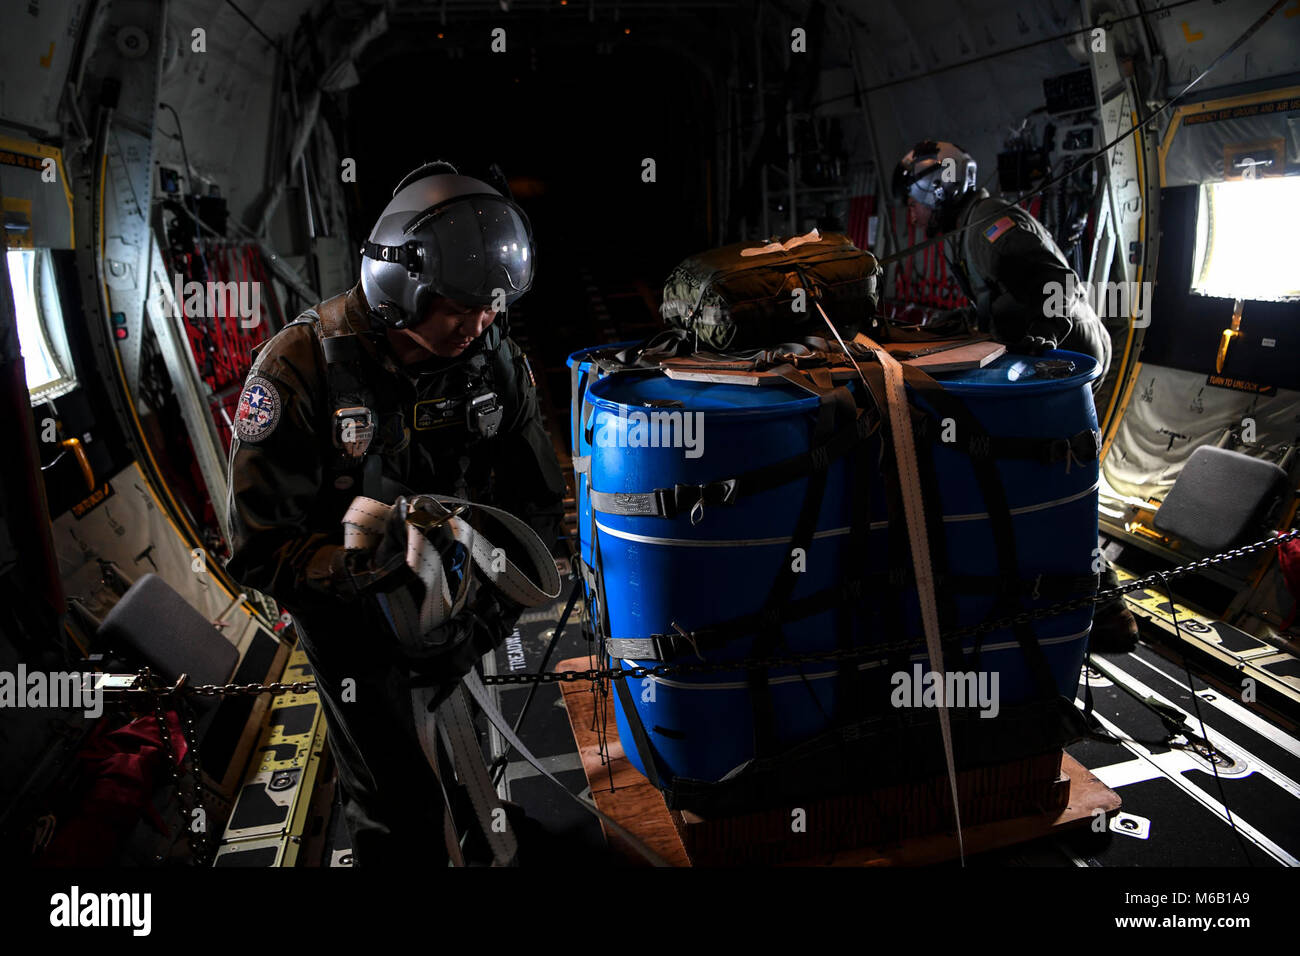 (Left) U.S. Air Force Tech. Sgt. John Quiason and Airman 1st Class Young Achuka, 36th Airlift Squadron loadmasters, prepare a pallet for an airdrop on a U.S. Air Force C-130J Super Hercules during exercise COPE NORTH 18 near Tinian, U.S. Commonwealth of the Northern Mariana Islands, Feb. 27. CN18 is a Pacific Air Forces sponsored tri-lateral field training exercise (FTX) designed to develop synergistic and increase interoperability of U.S. Air Forces, Royal Australian Air Force (RAAF), and the Koku Jieitai (Japanese Air Self-Defense Force). (U.S. Air Force Stock Photo